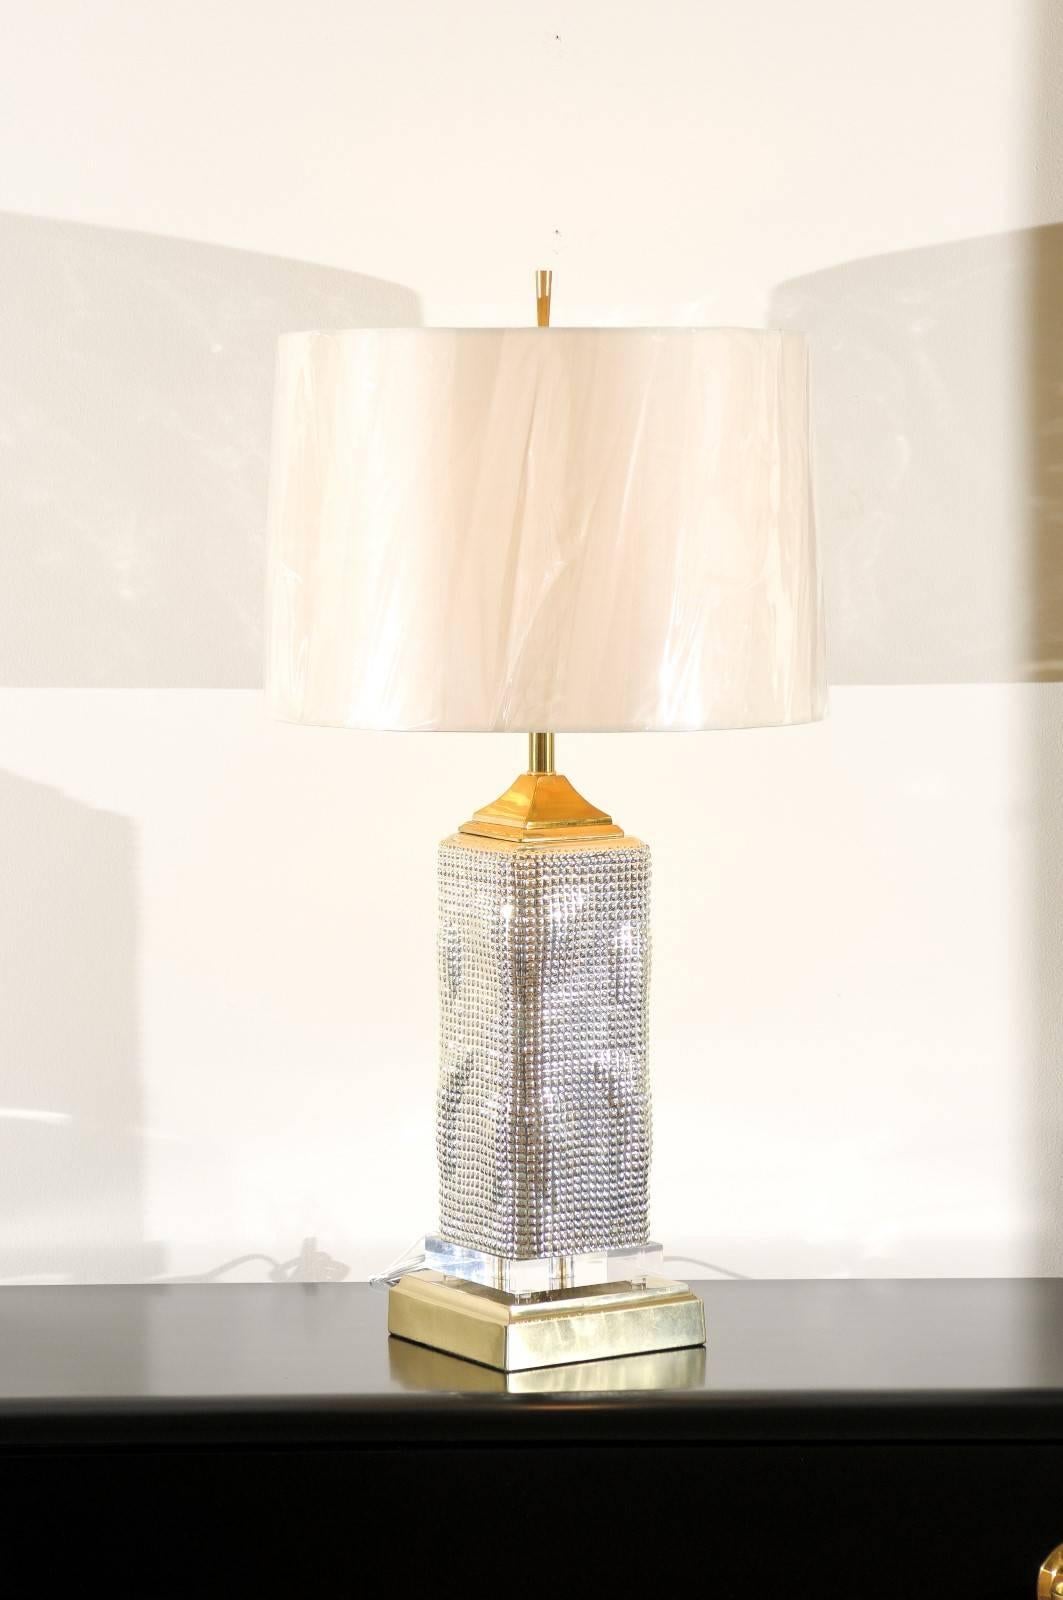 An absolutely fabulous and unique pair of custom-made Skyscraper lamps. Vintage blown mercury glass vessels with beautiful color, sheen and texture. Vintage solid brass accents along with a new museum quality Lucite plinth. Exquisite jewelry!